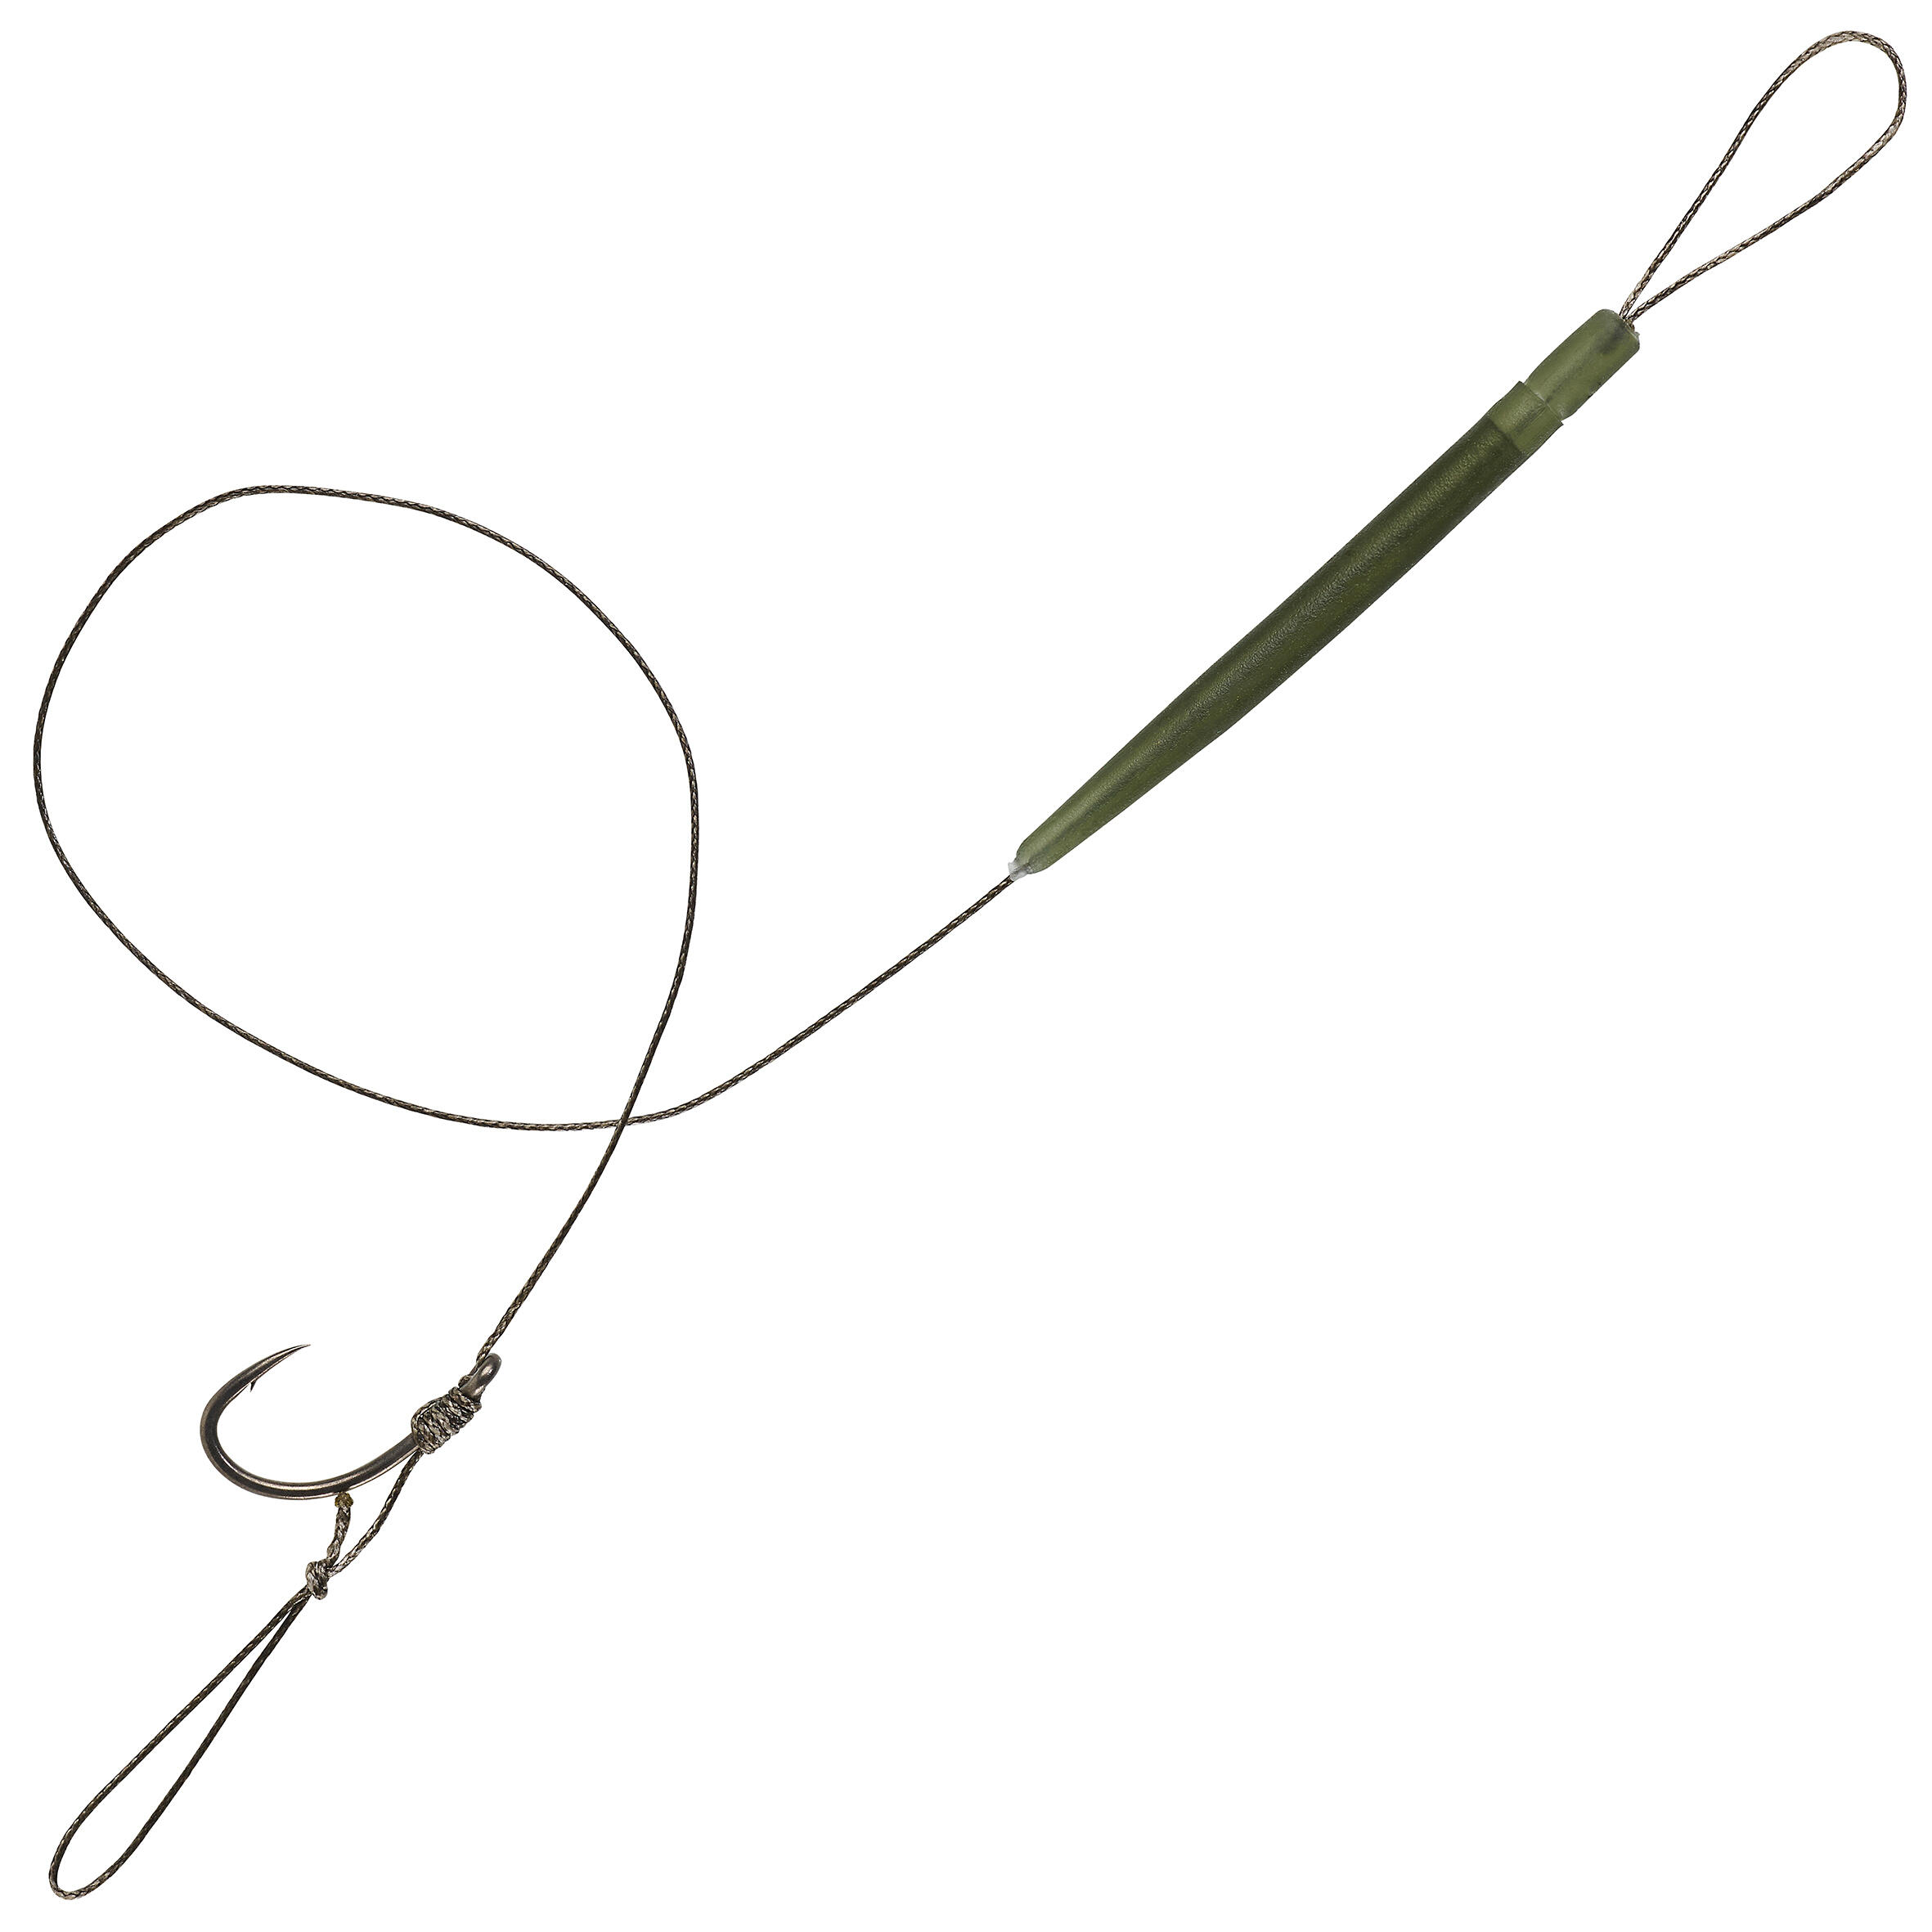 SN Hook 100 rigged leader for Carp fishing 3/3